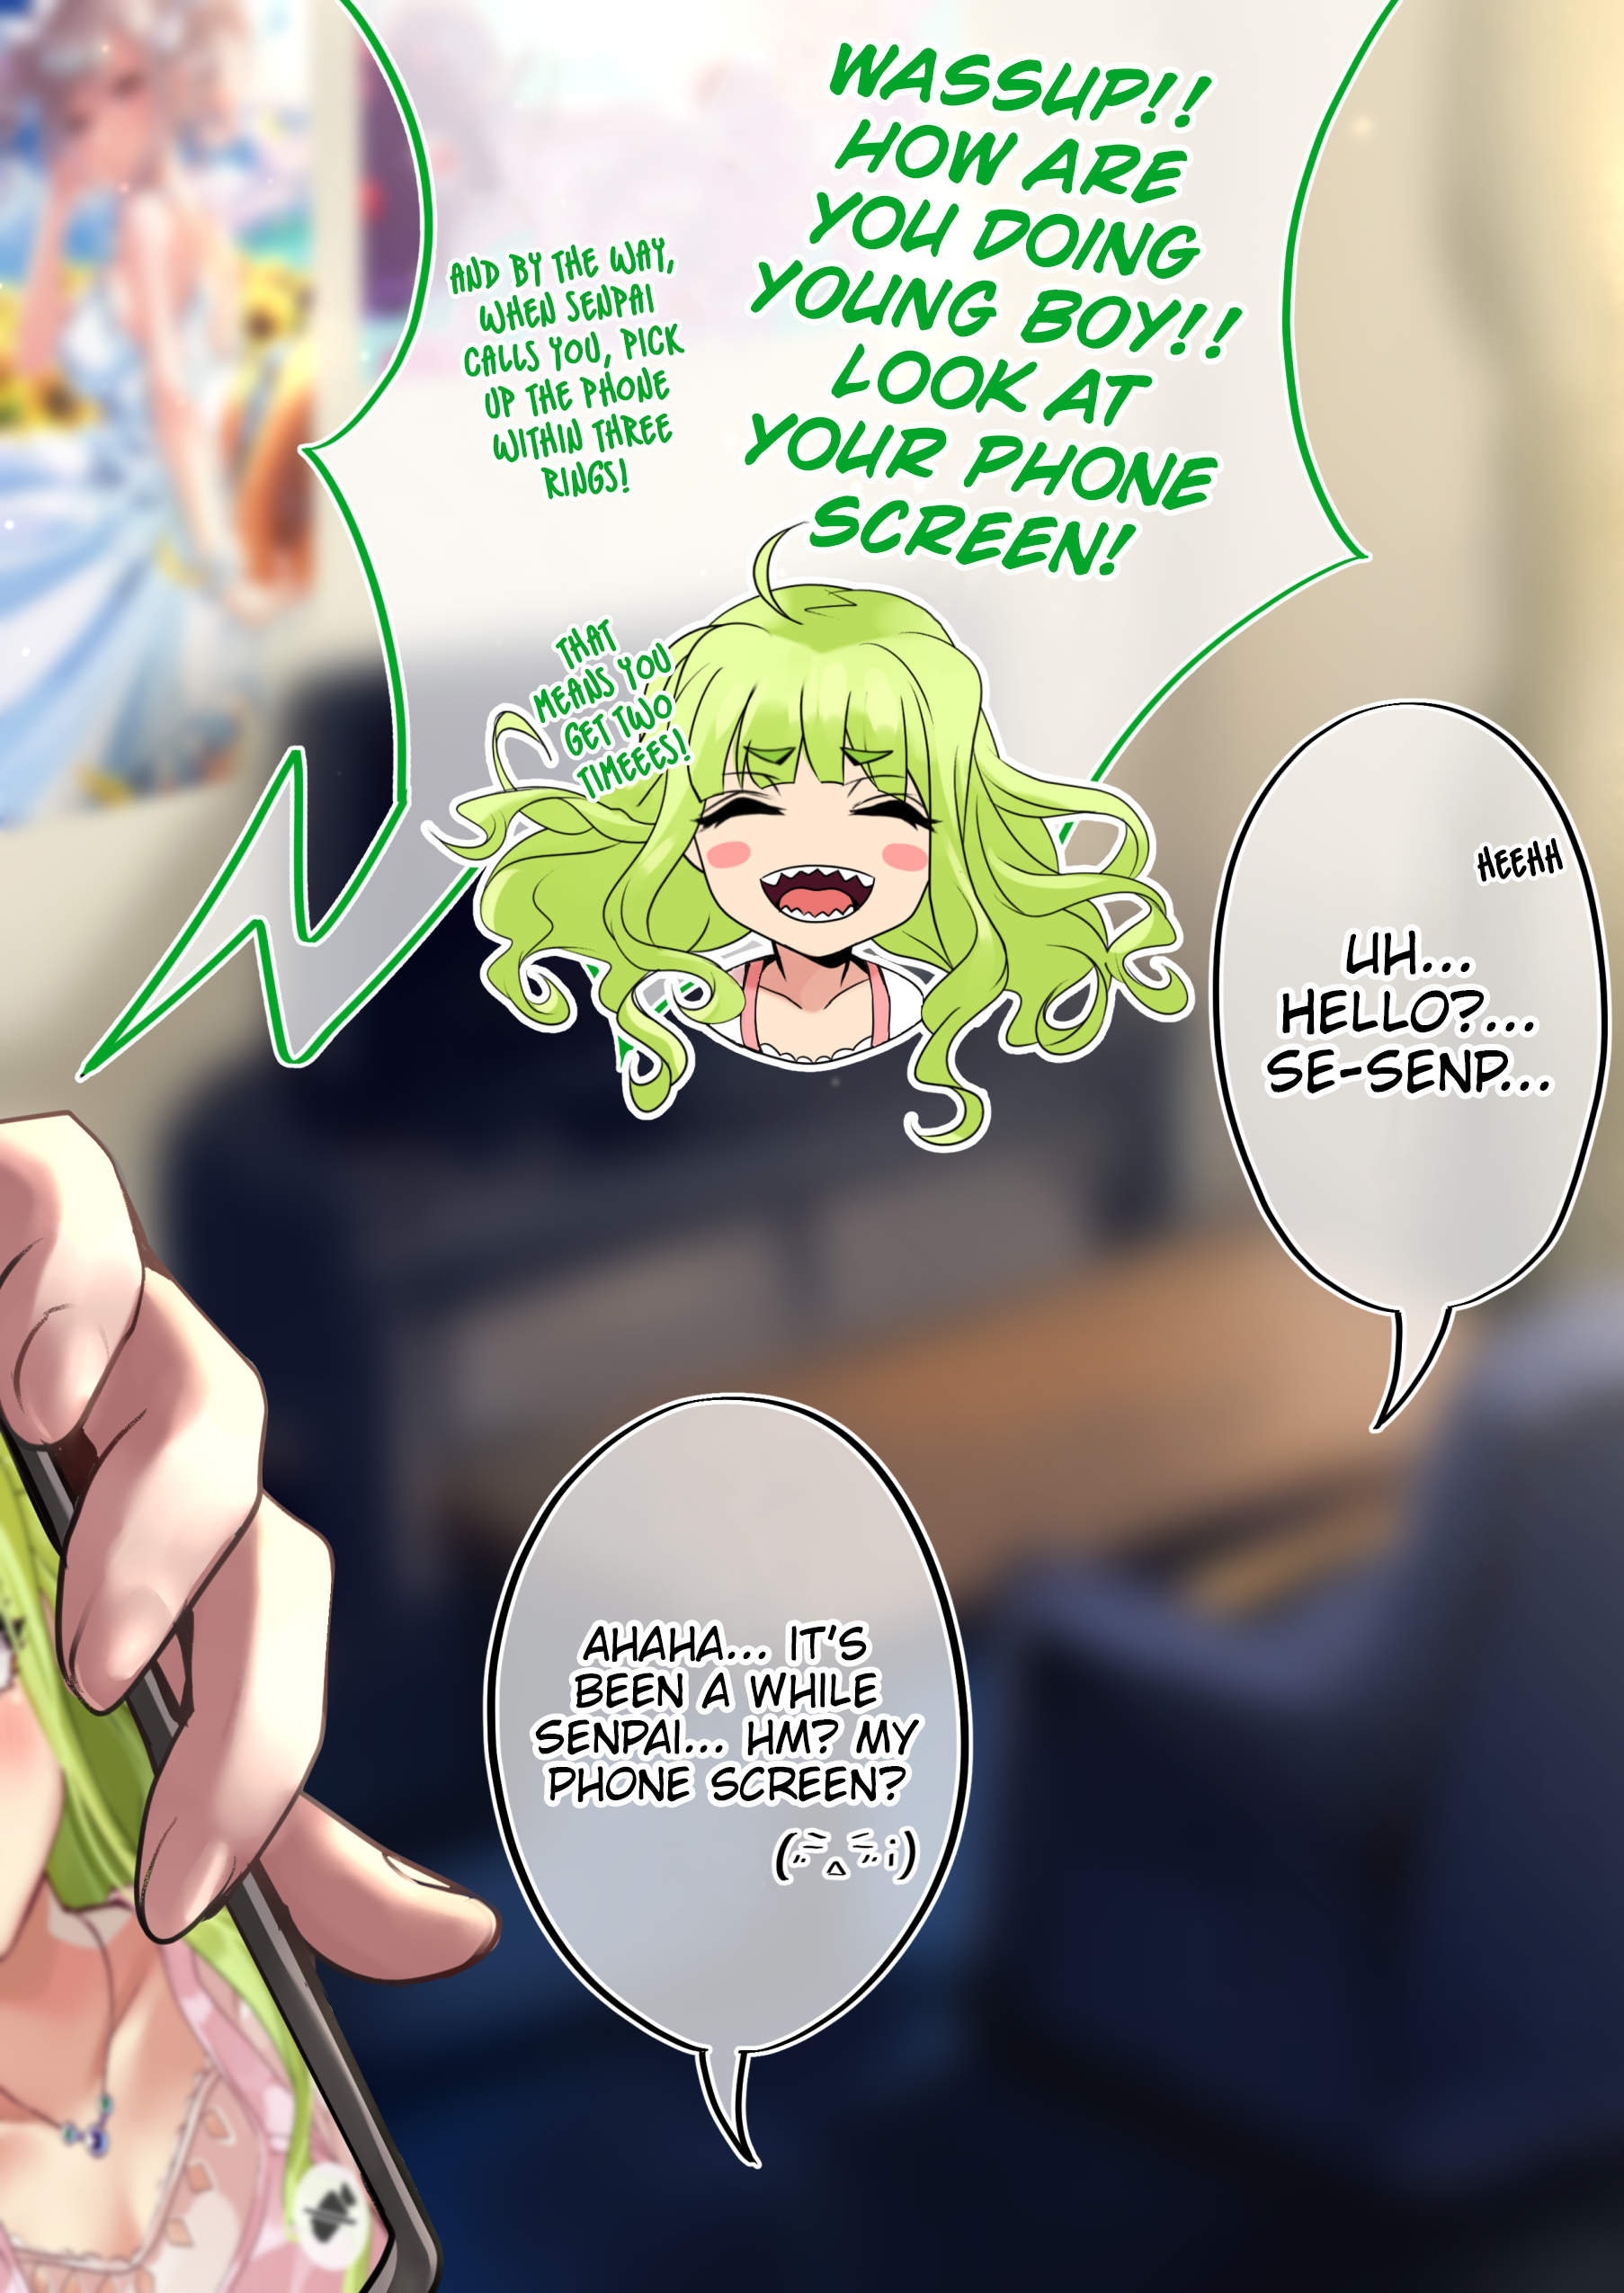 The Story Of An Otaku And A Gyaru Falling In Love - Page 3